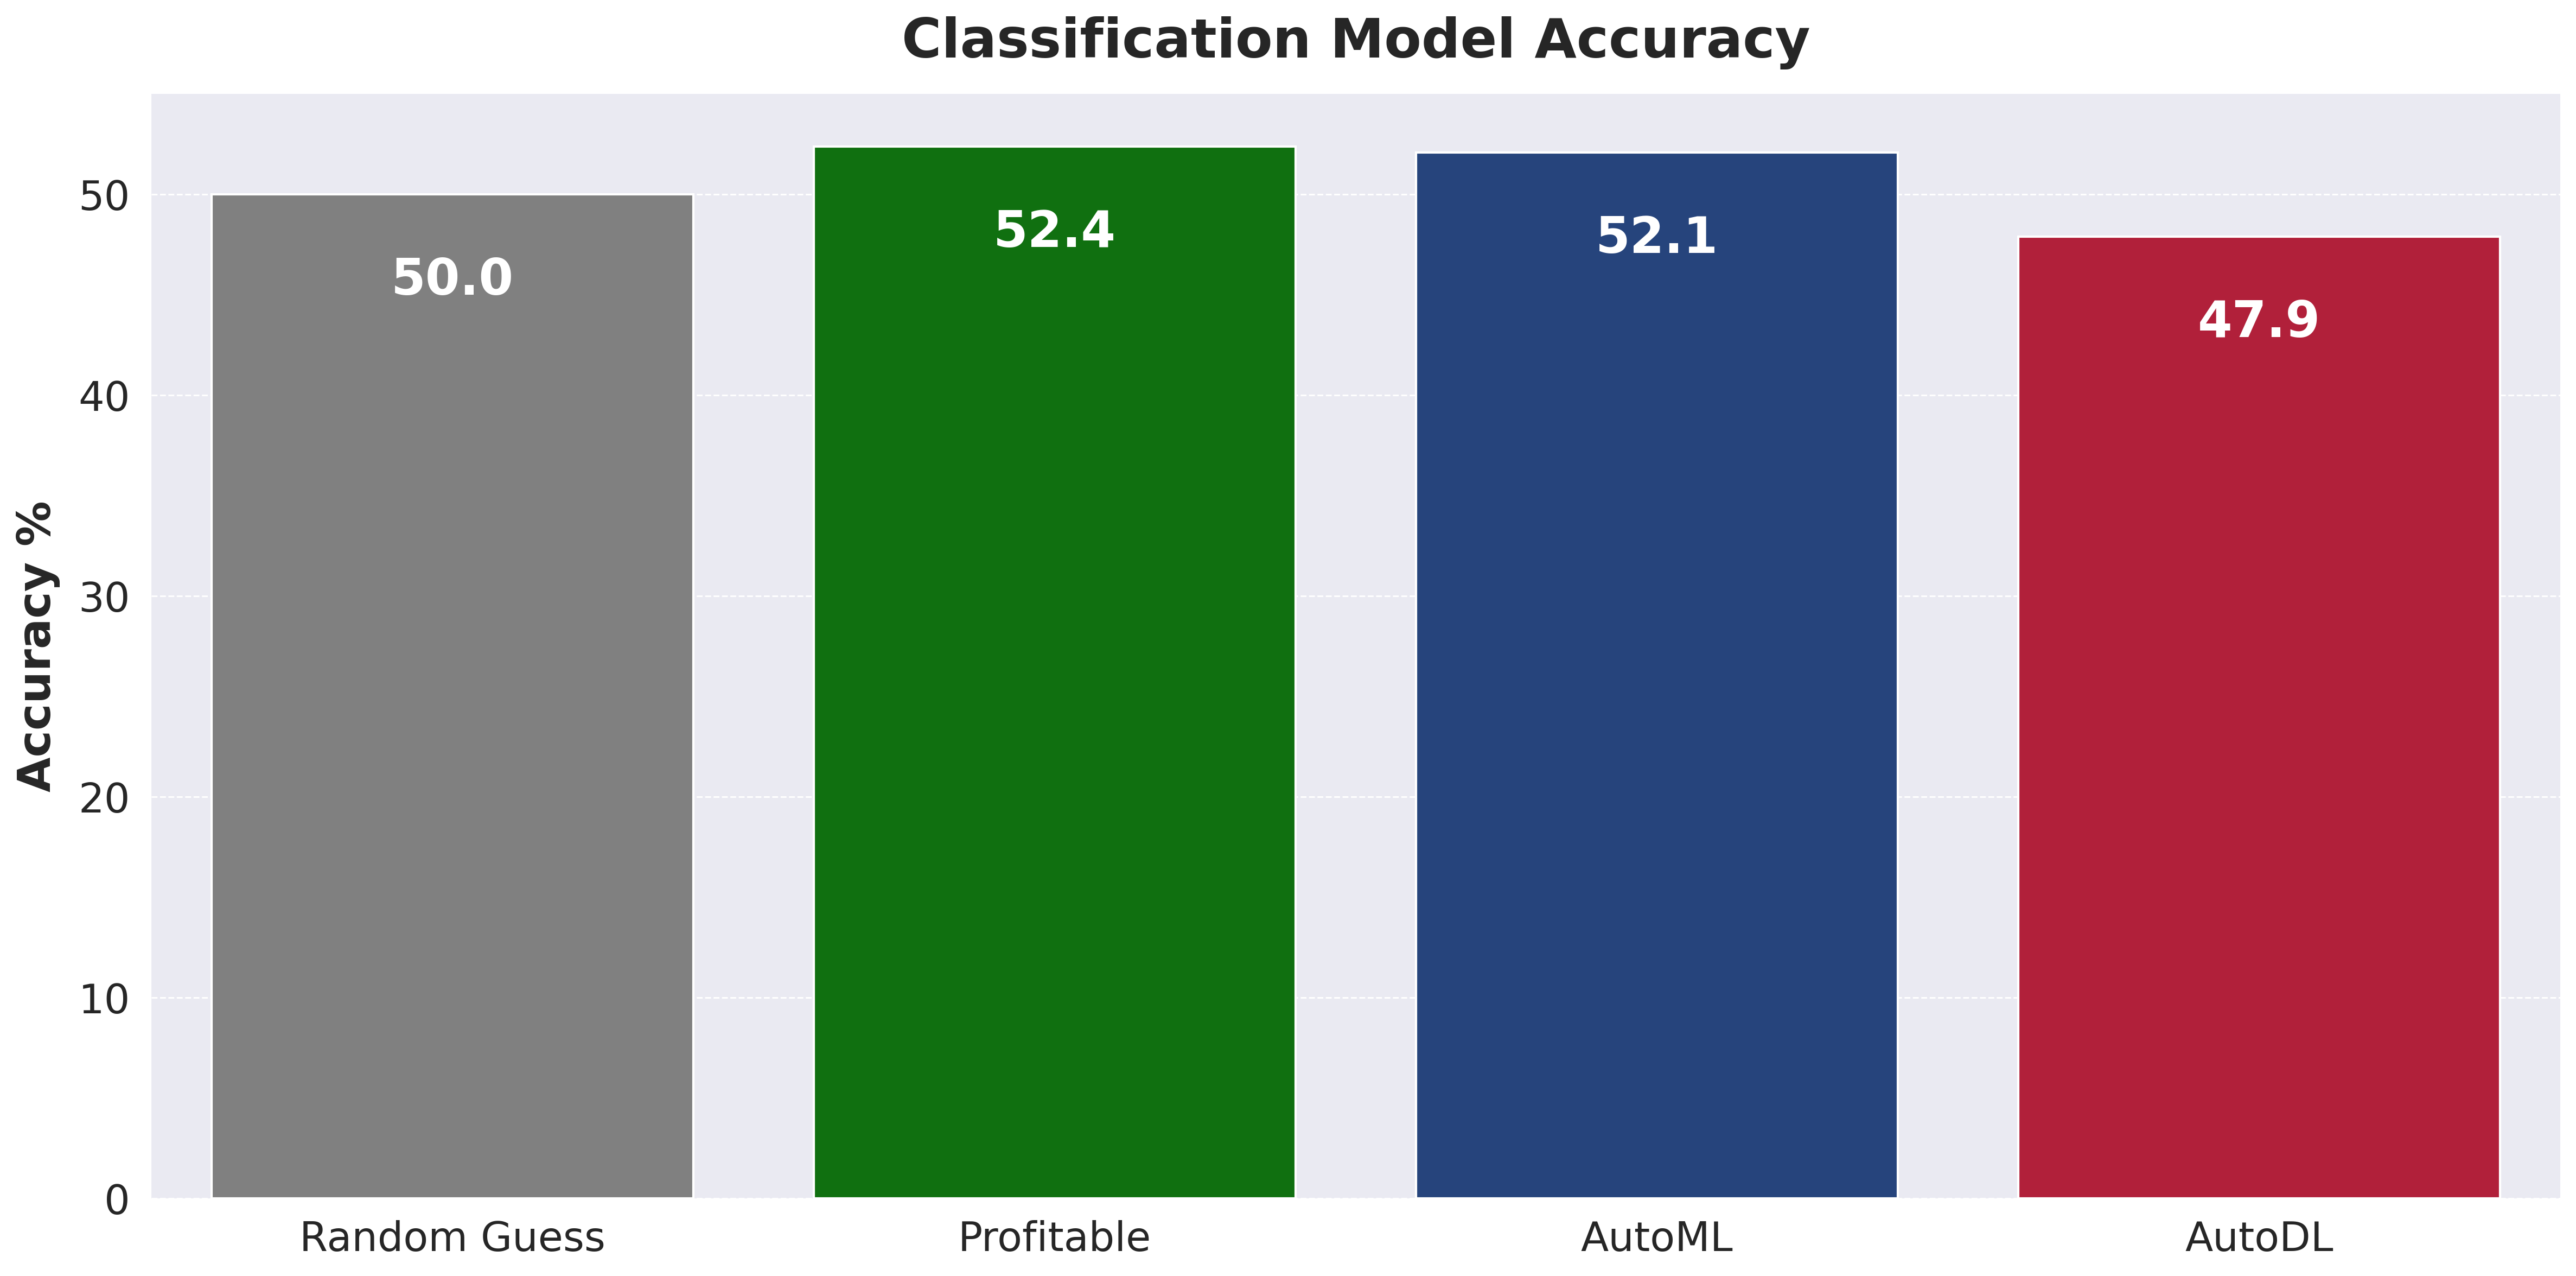 Classification Model Accuracy